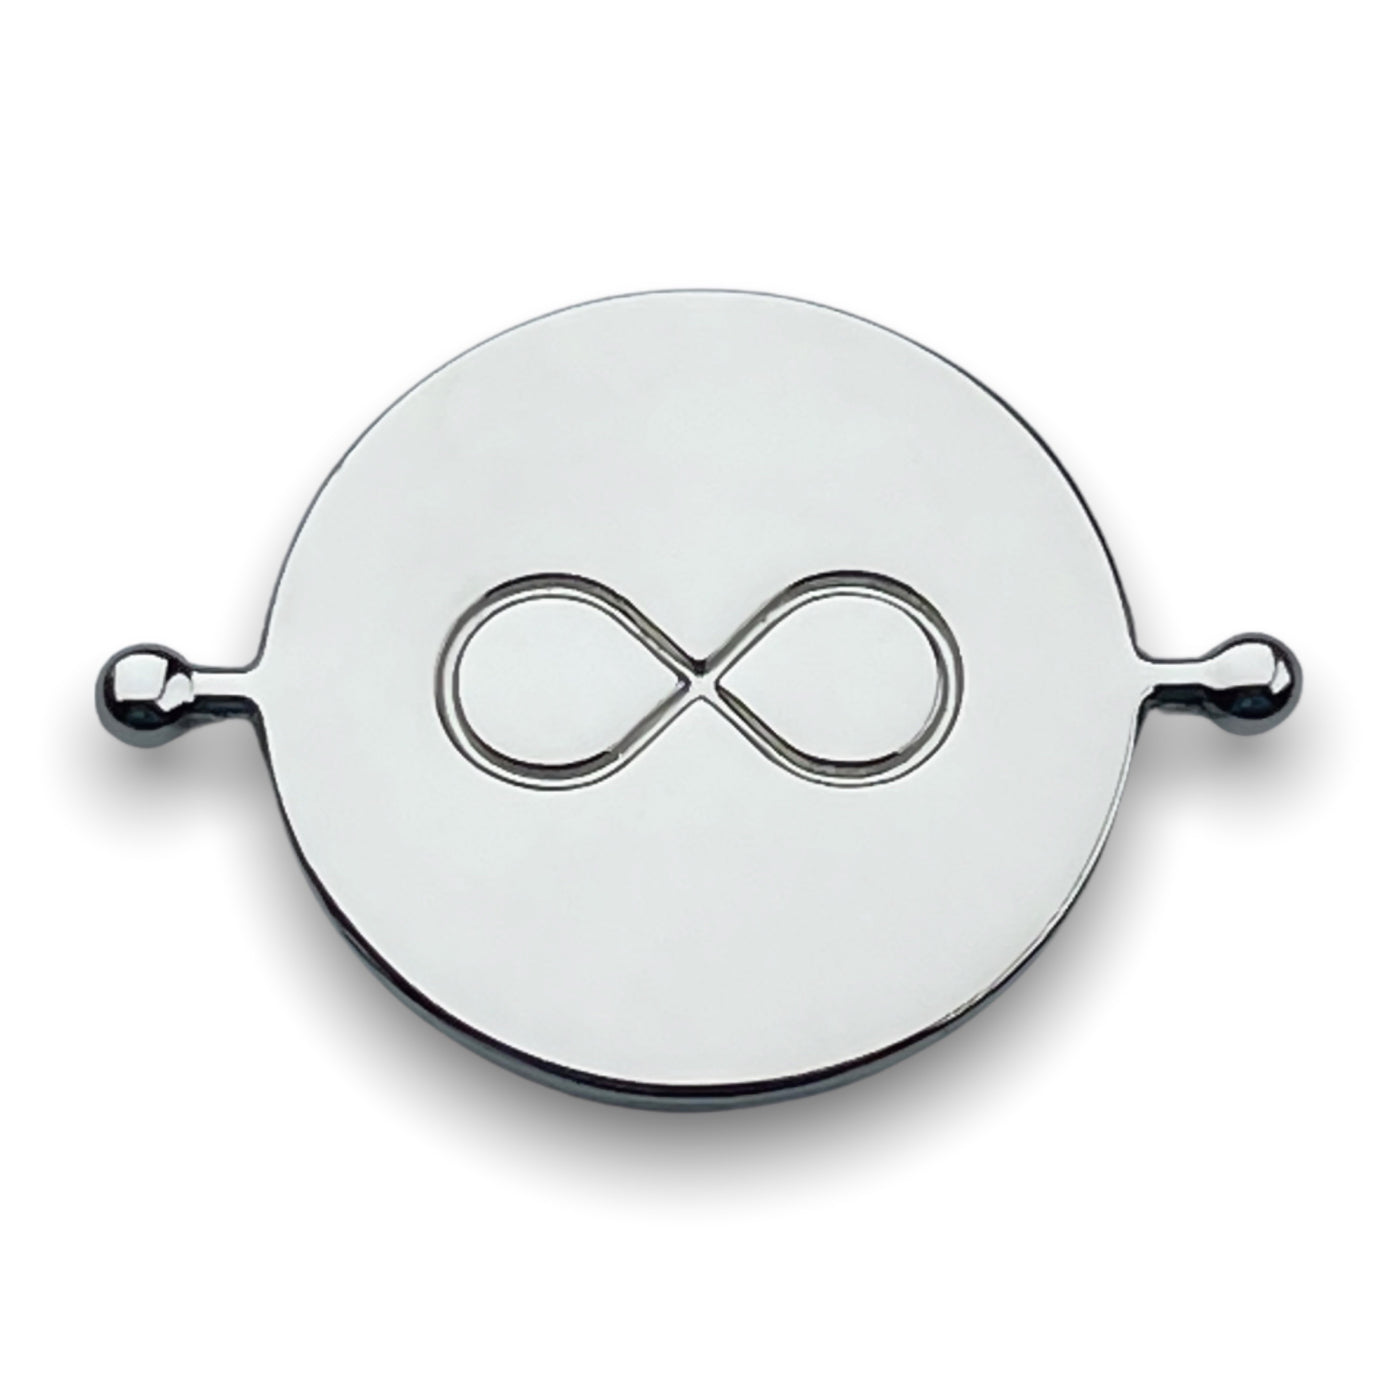 Infinity Symbol / MINDS of all KINDS Element (spin to combine)